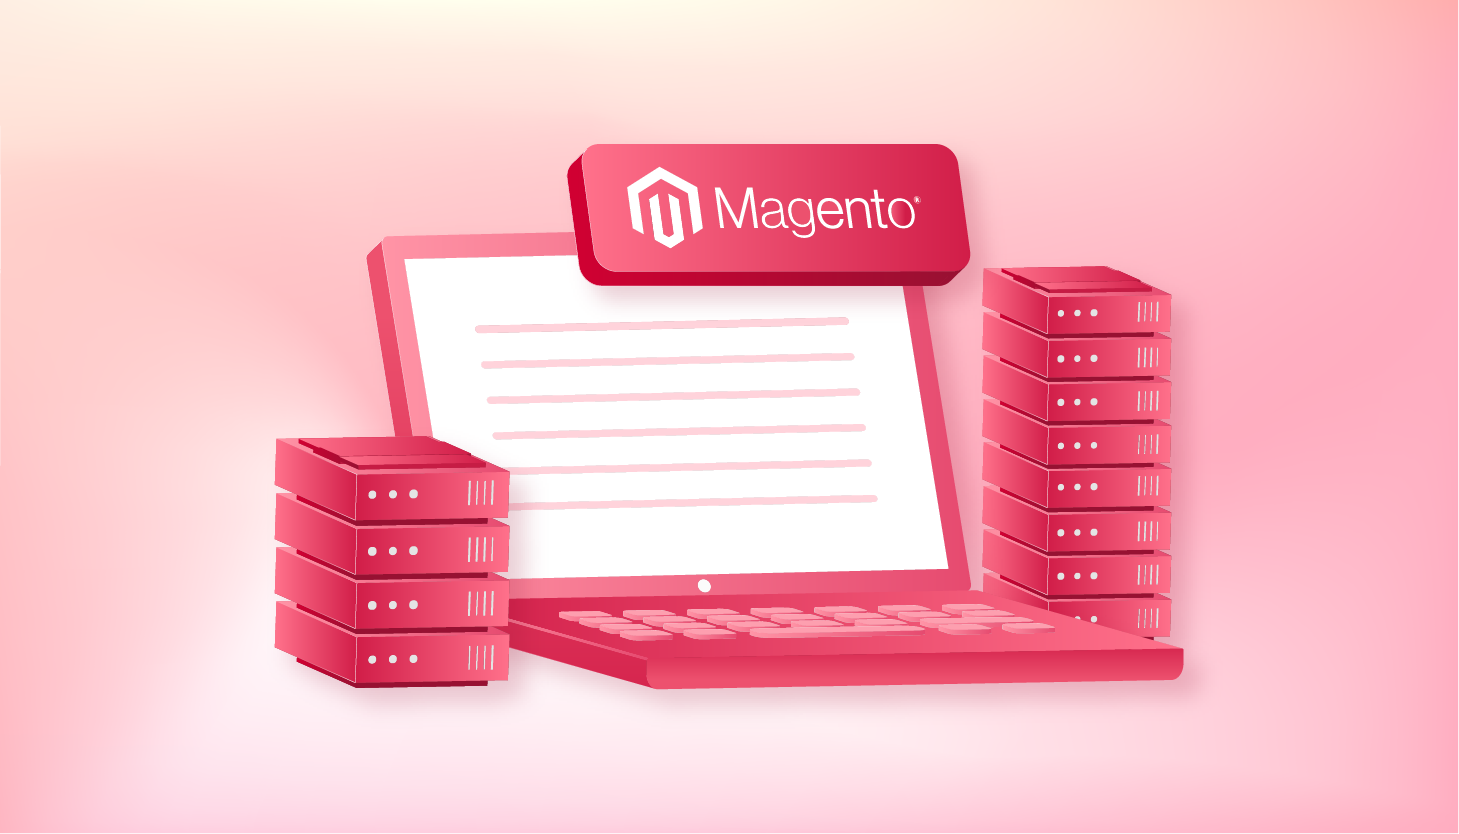 How to Choose the Right Magento Hosting VPS Provider